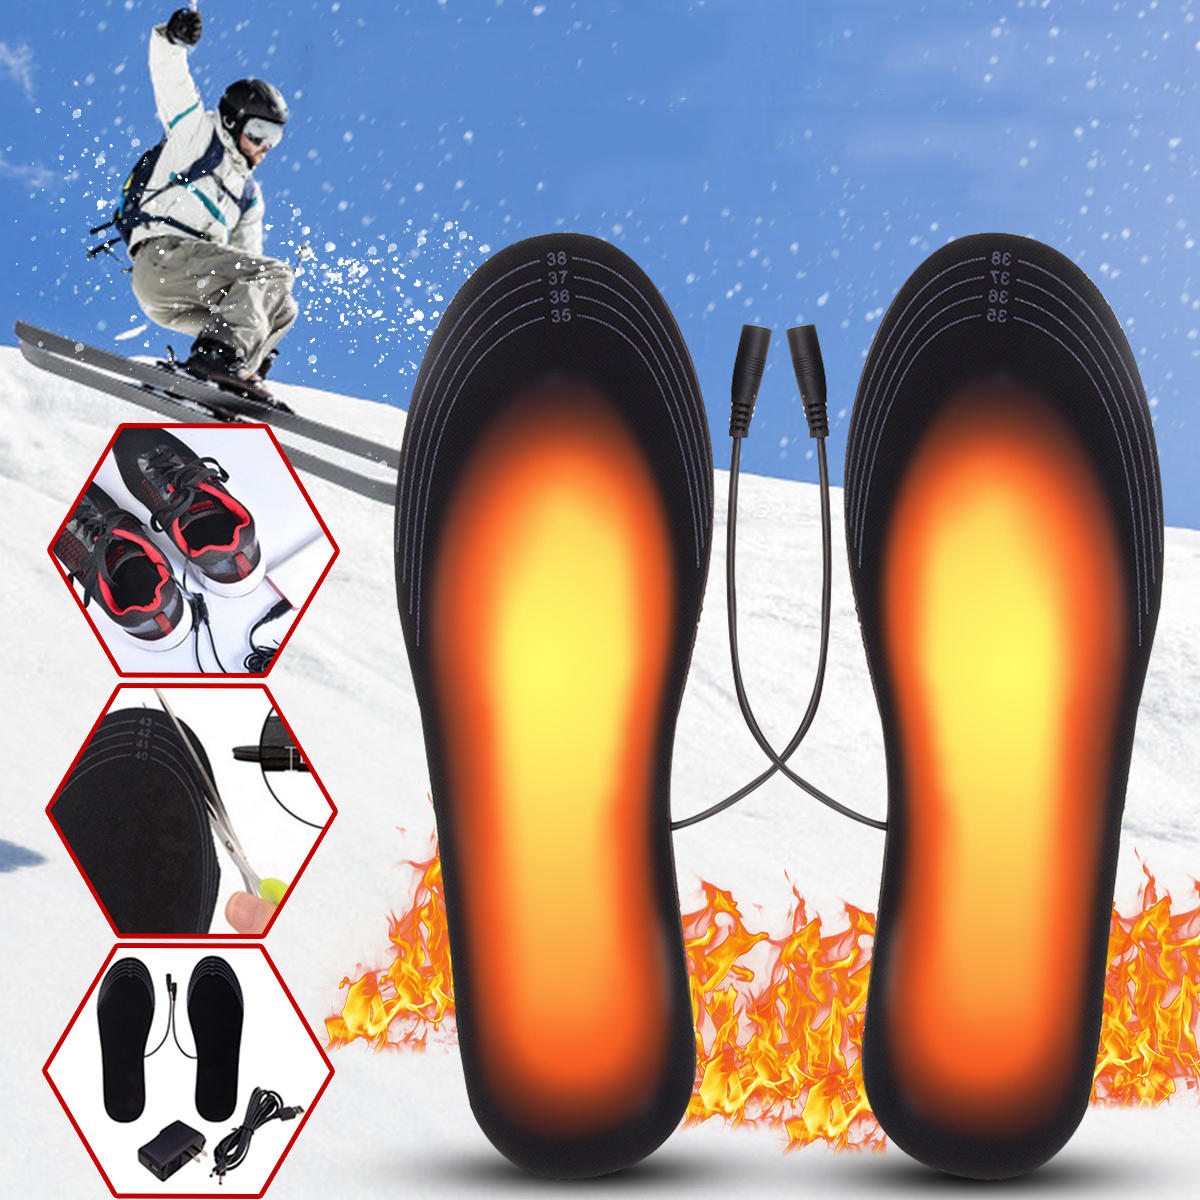 5V 2A Electric Heated Feet Shoe Insole USB Foot Heater Warmer Breathable Washable and Cropable Deodorant With Adapter